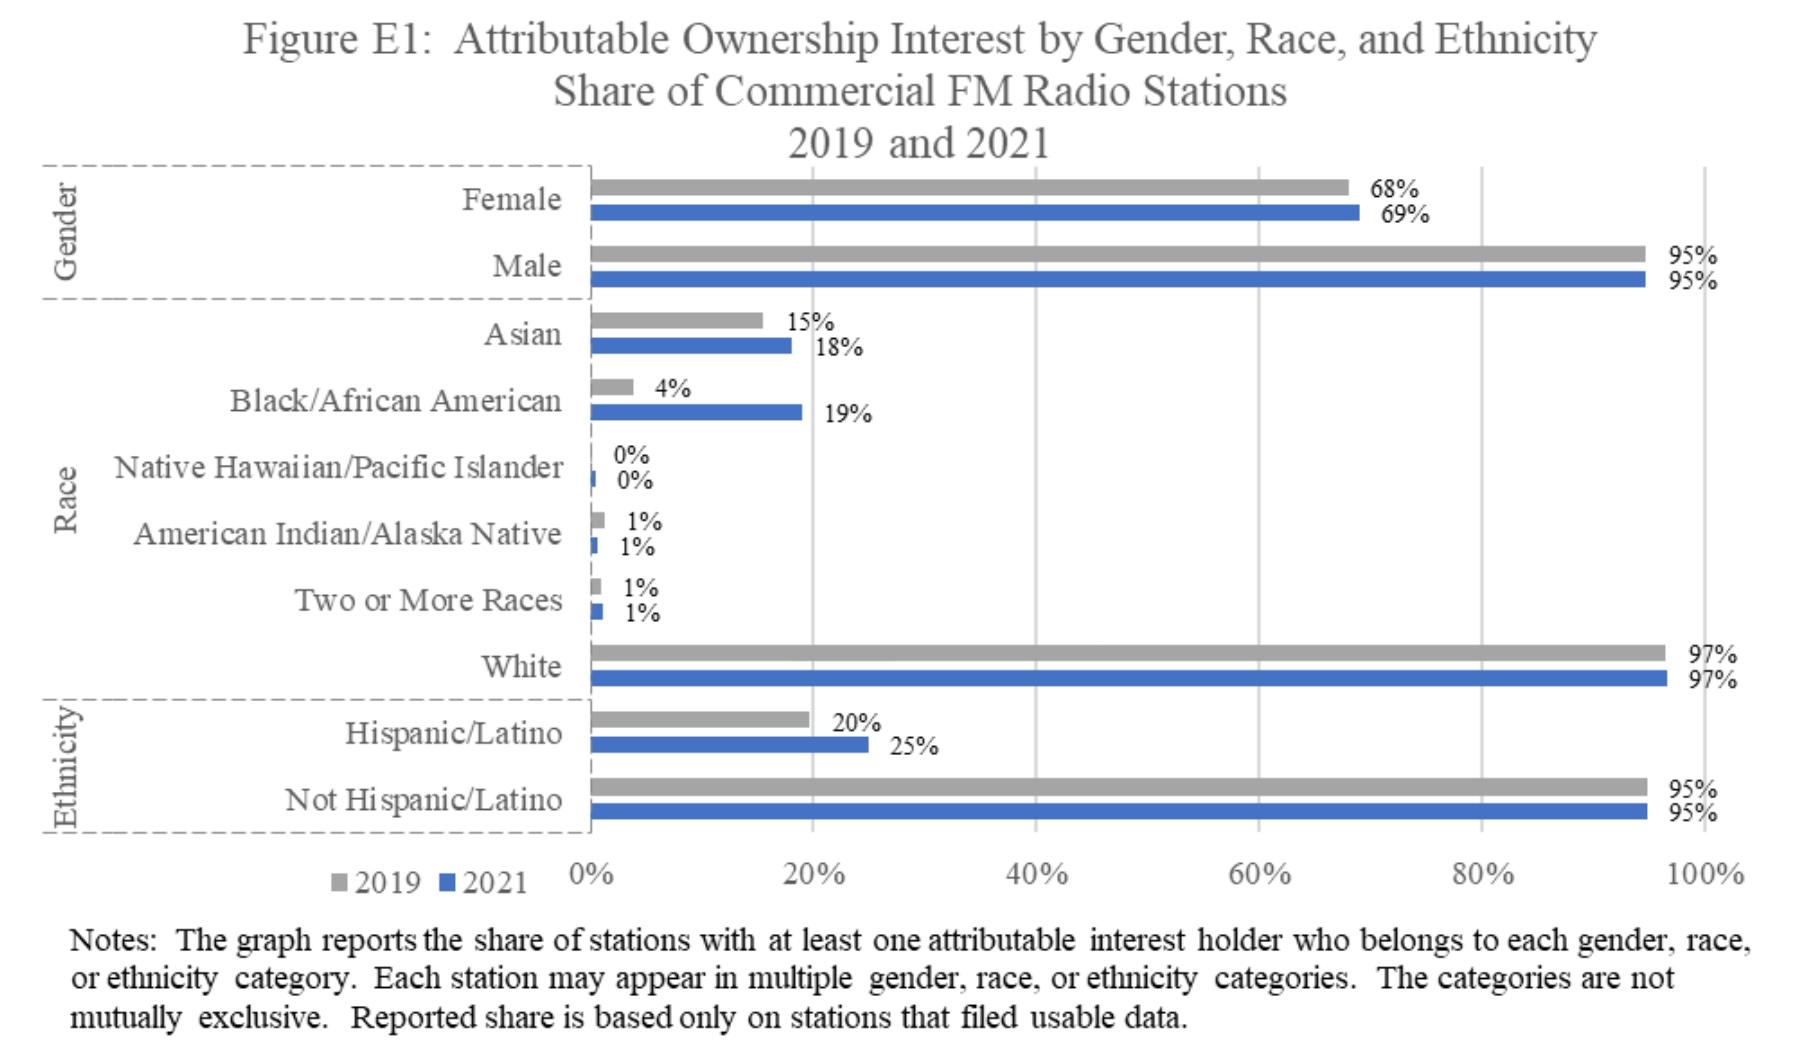 Attributable Ownership Interest by Gender, Race, and Ethnicity Share of Commercial FM Radio Stations